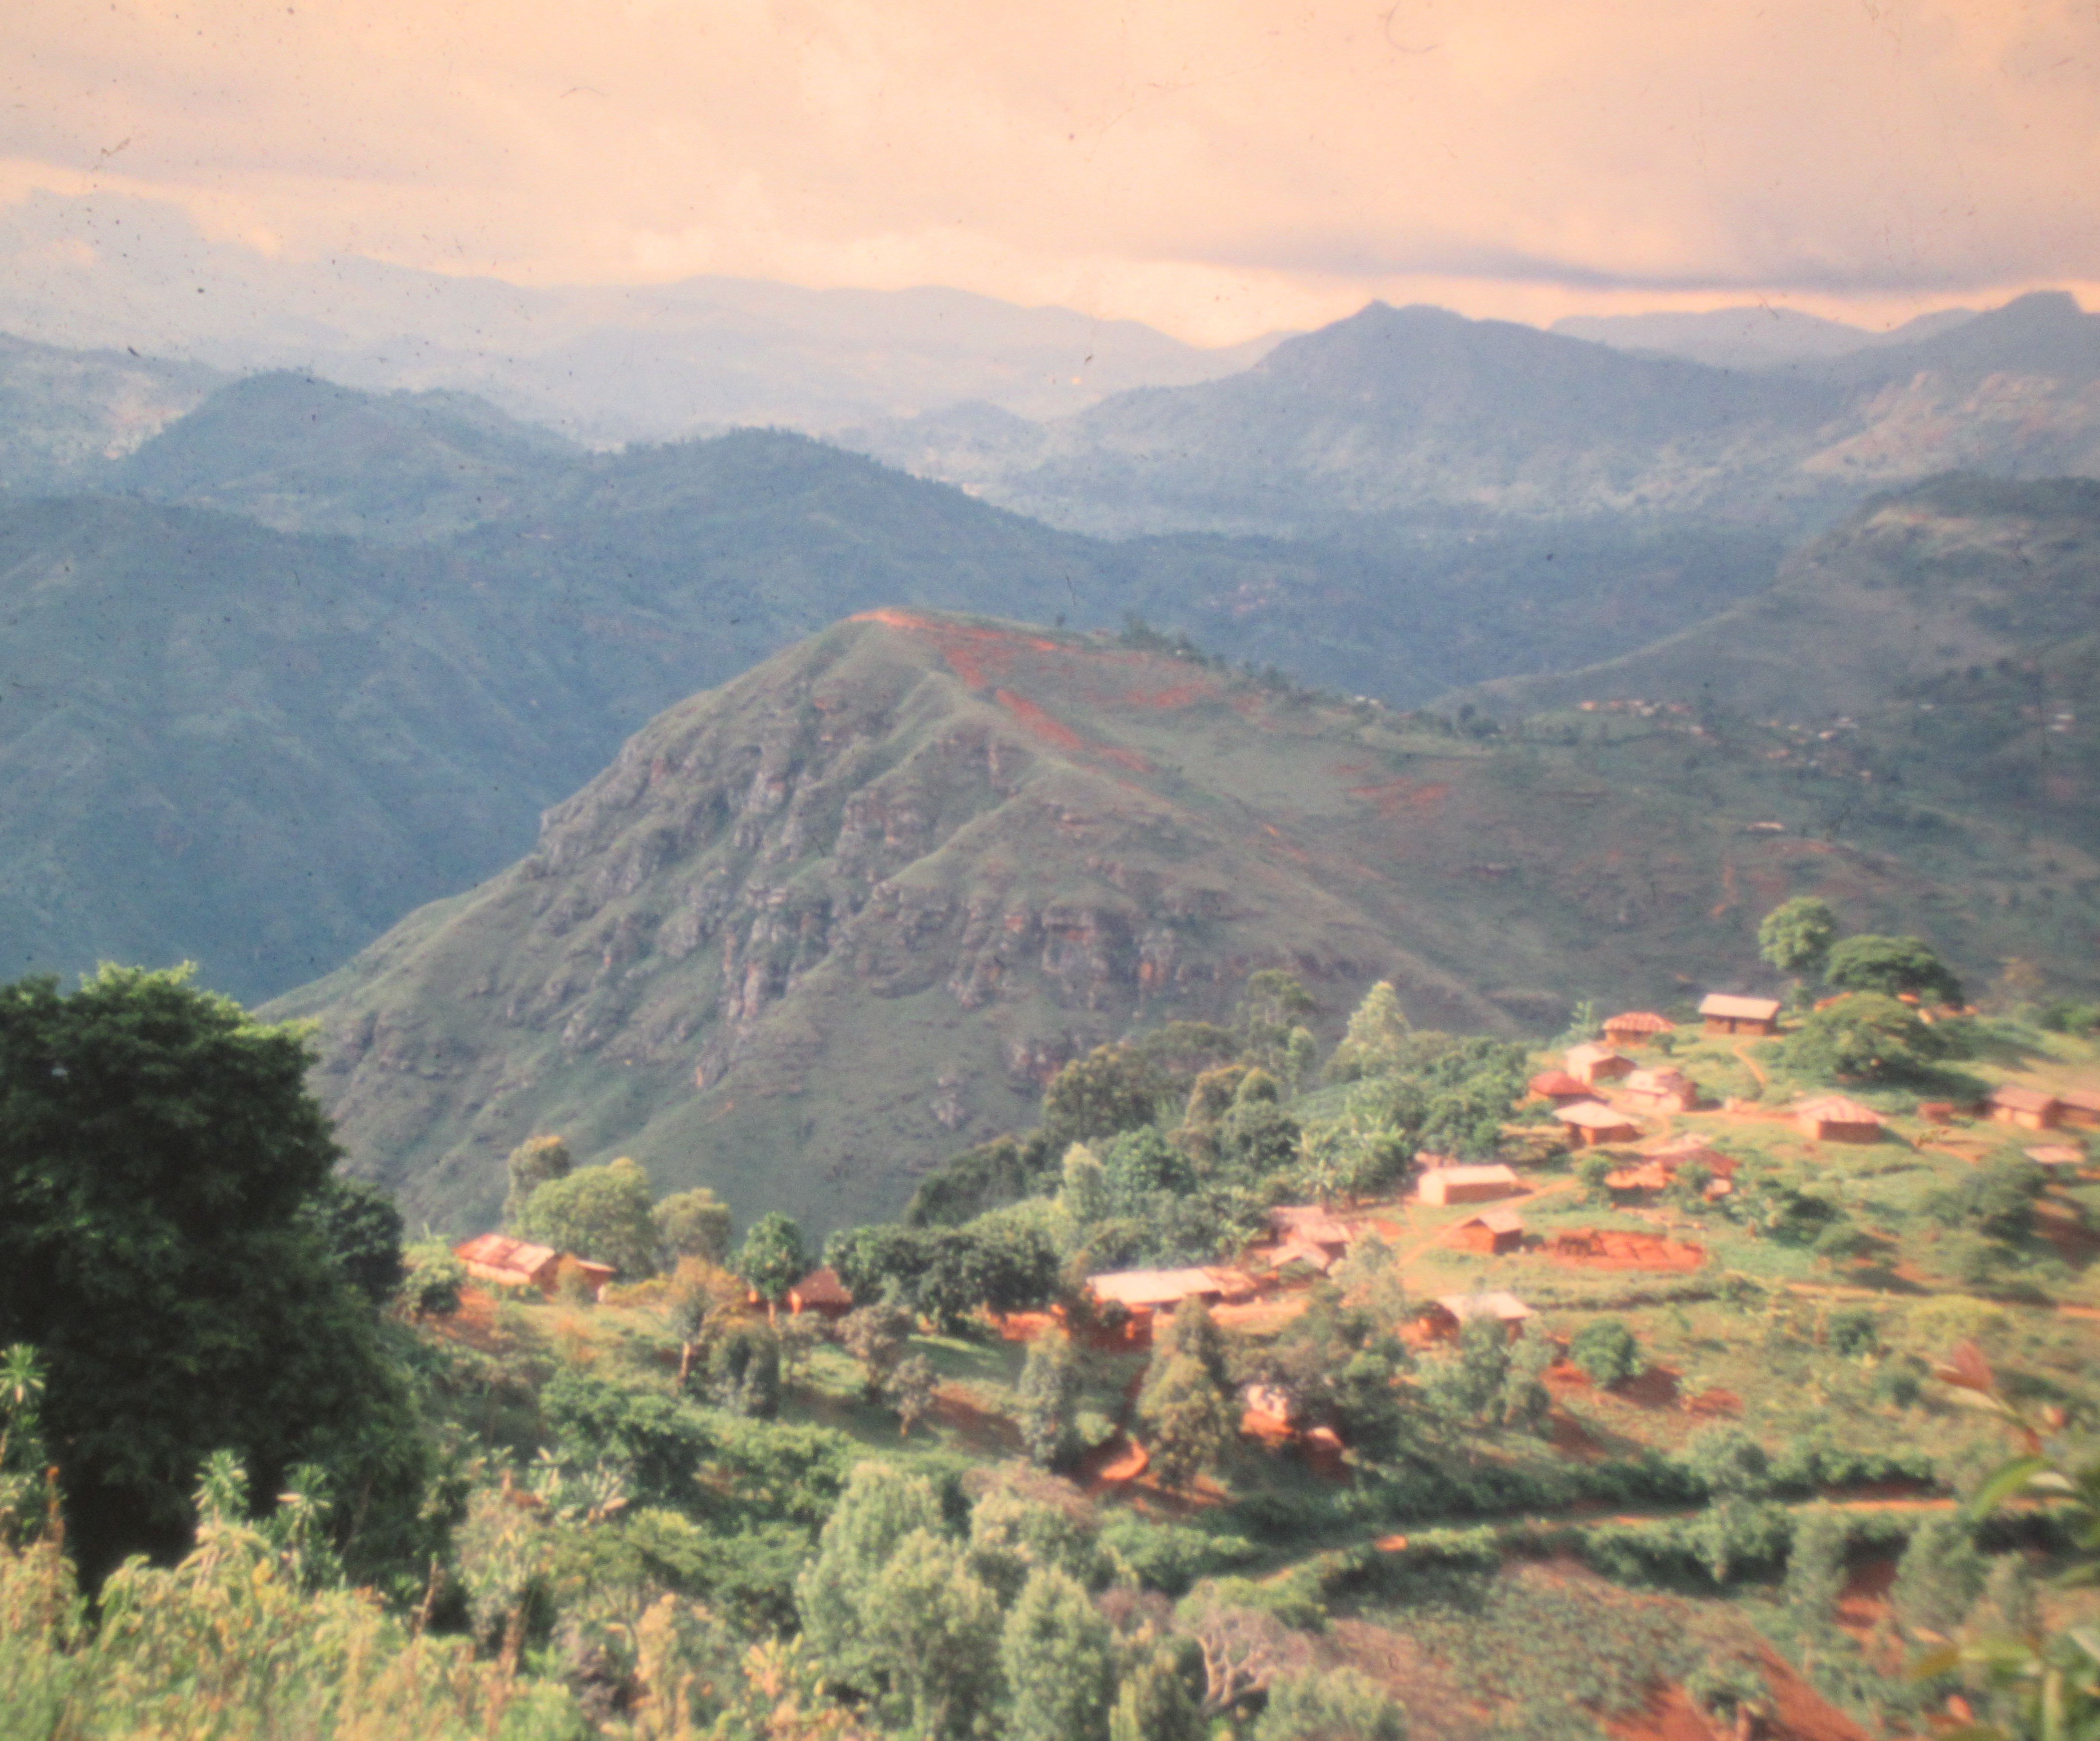 A photo of the West Usambara Mountains in Northeast Tanzania.